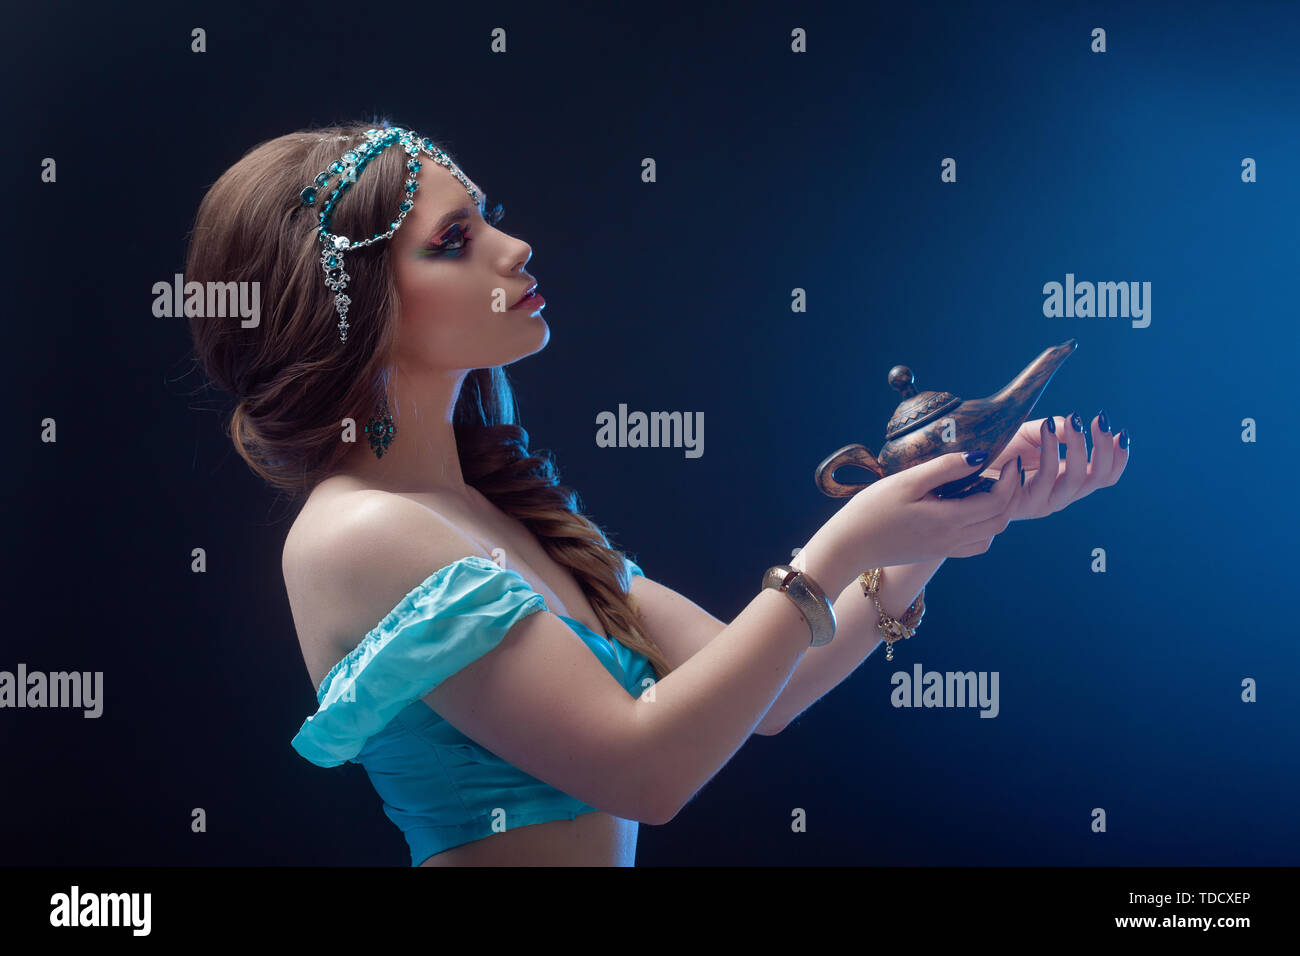 Jasmine the heroine of the Eastern fairy tale, Arab night, the girl calls gin and makes a wish. Stock Photo